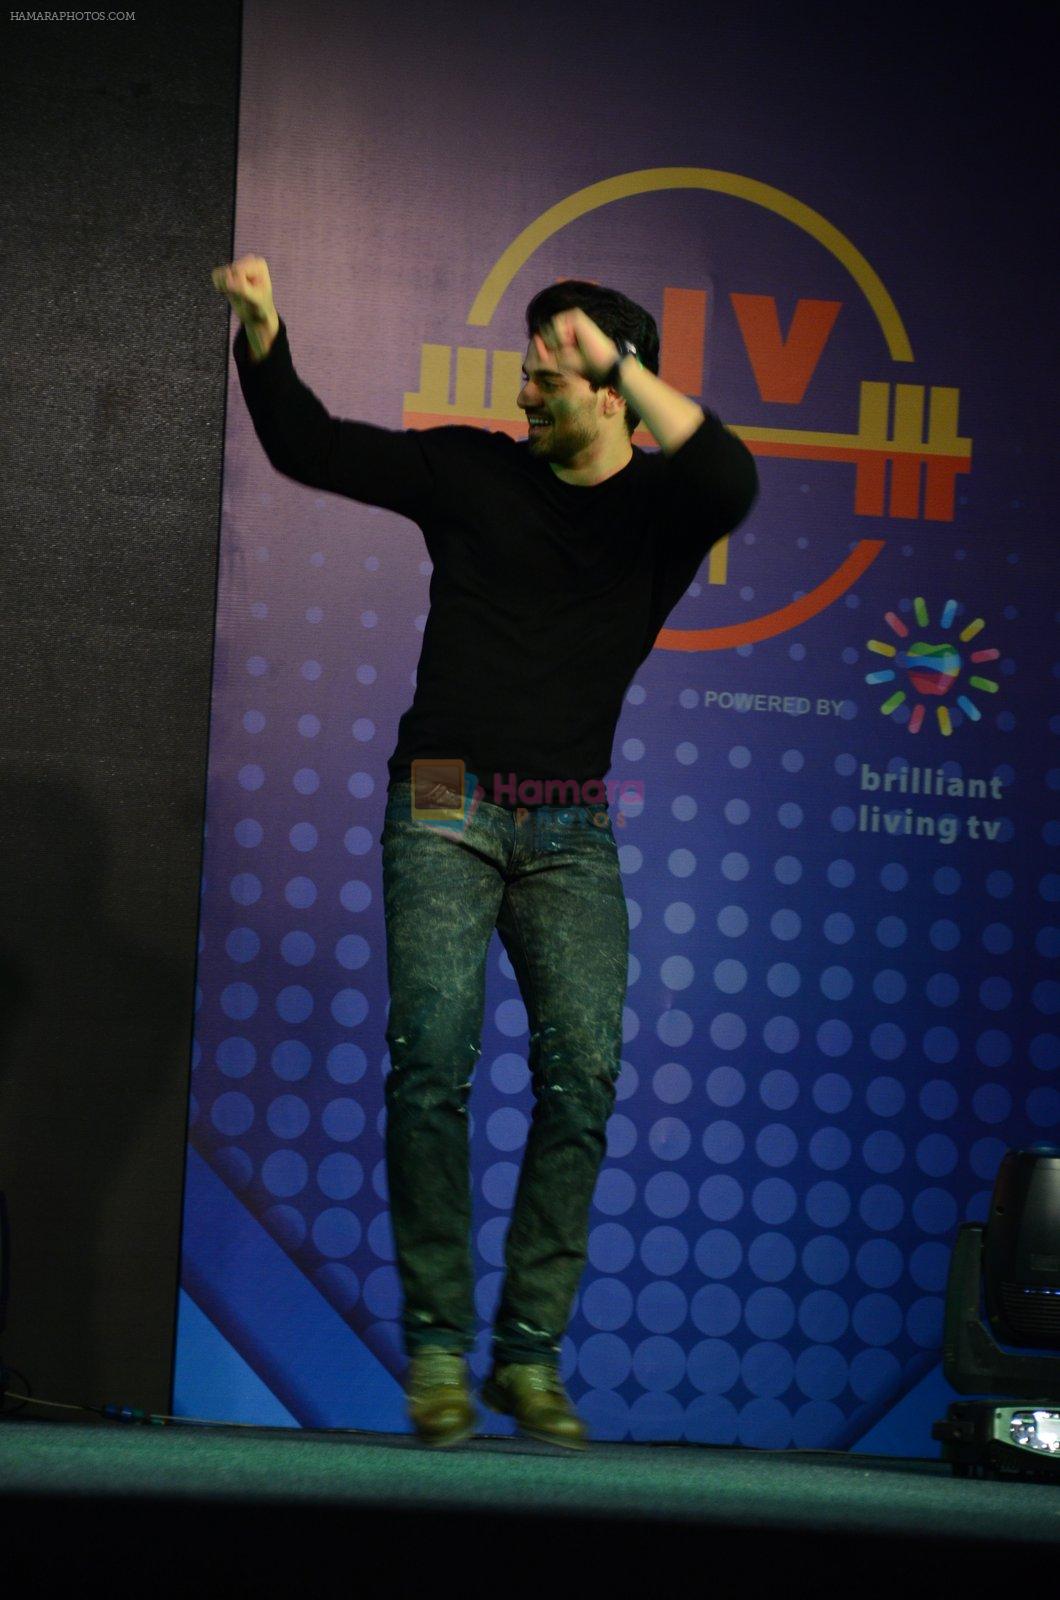 Sooraj Pancholi snapped at Sony Liv fitness event on 19th Jan 2017